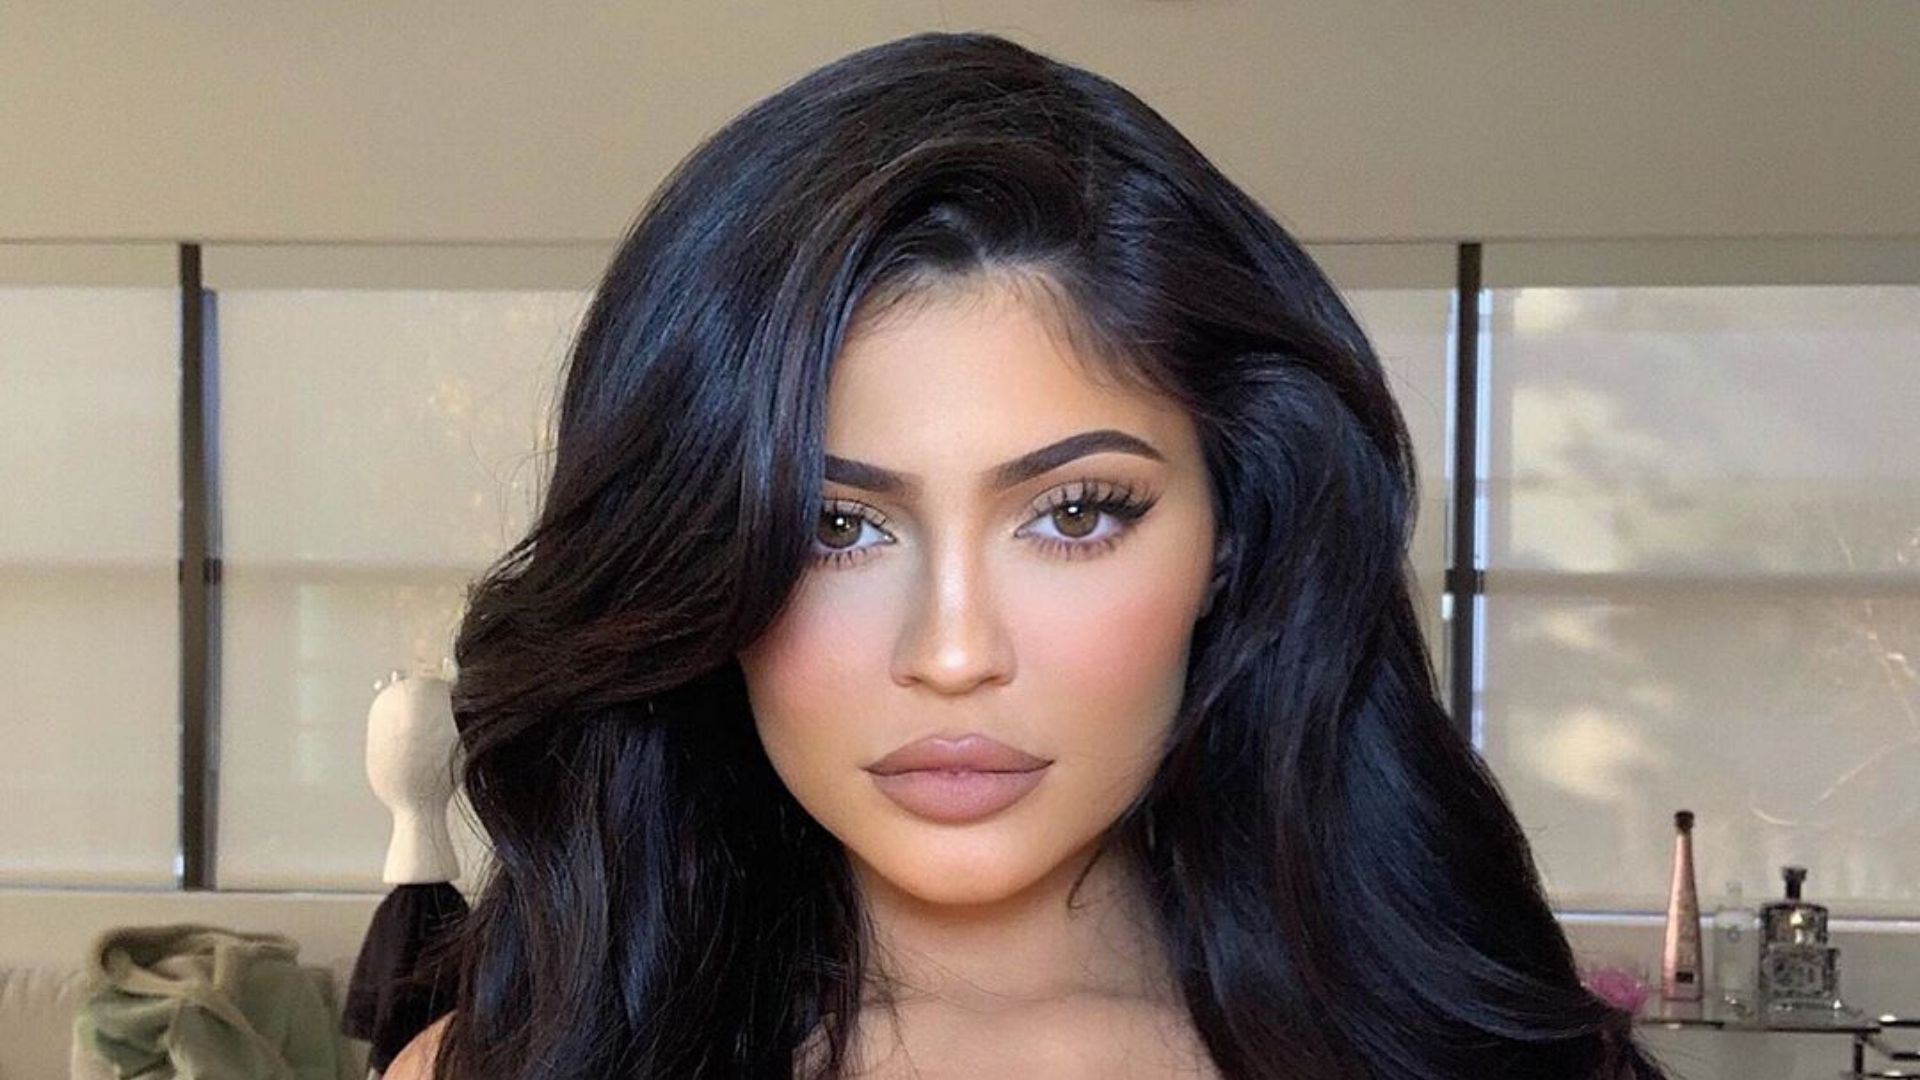 Kylie Jenner Donated $1 Million to Australia After Wearing Louis